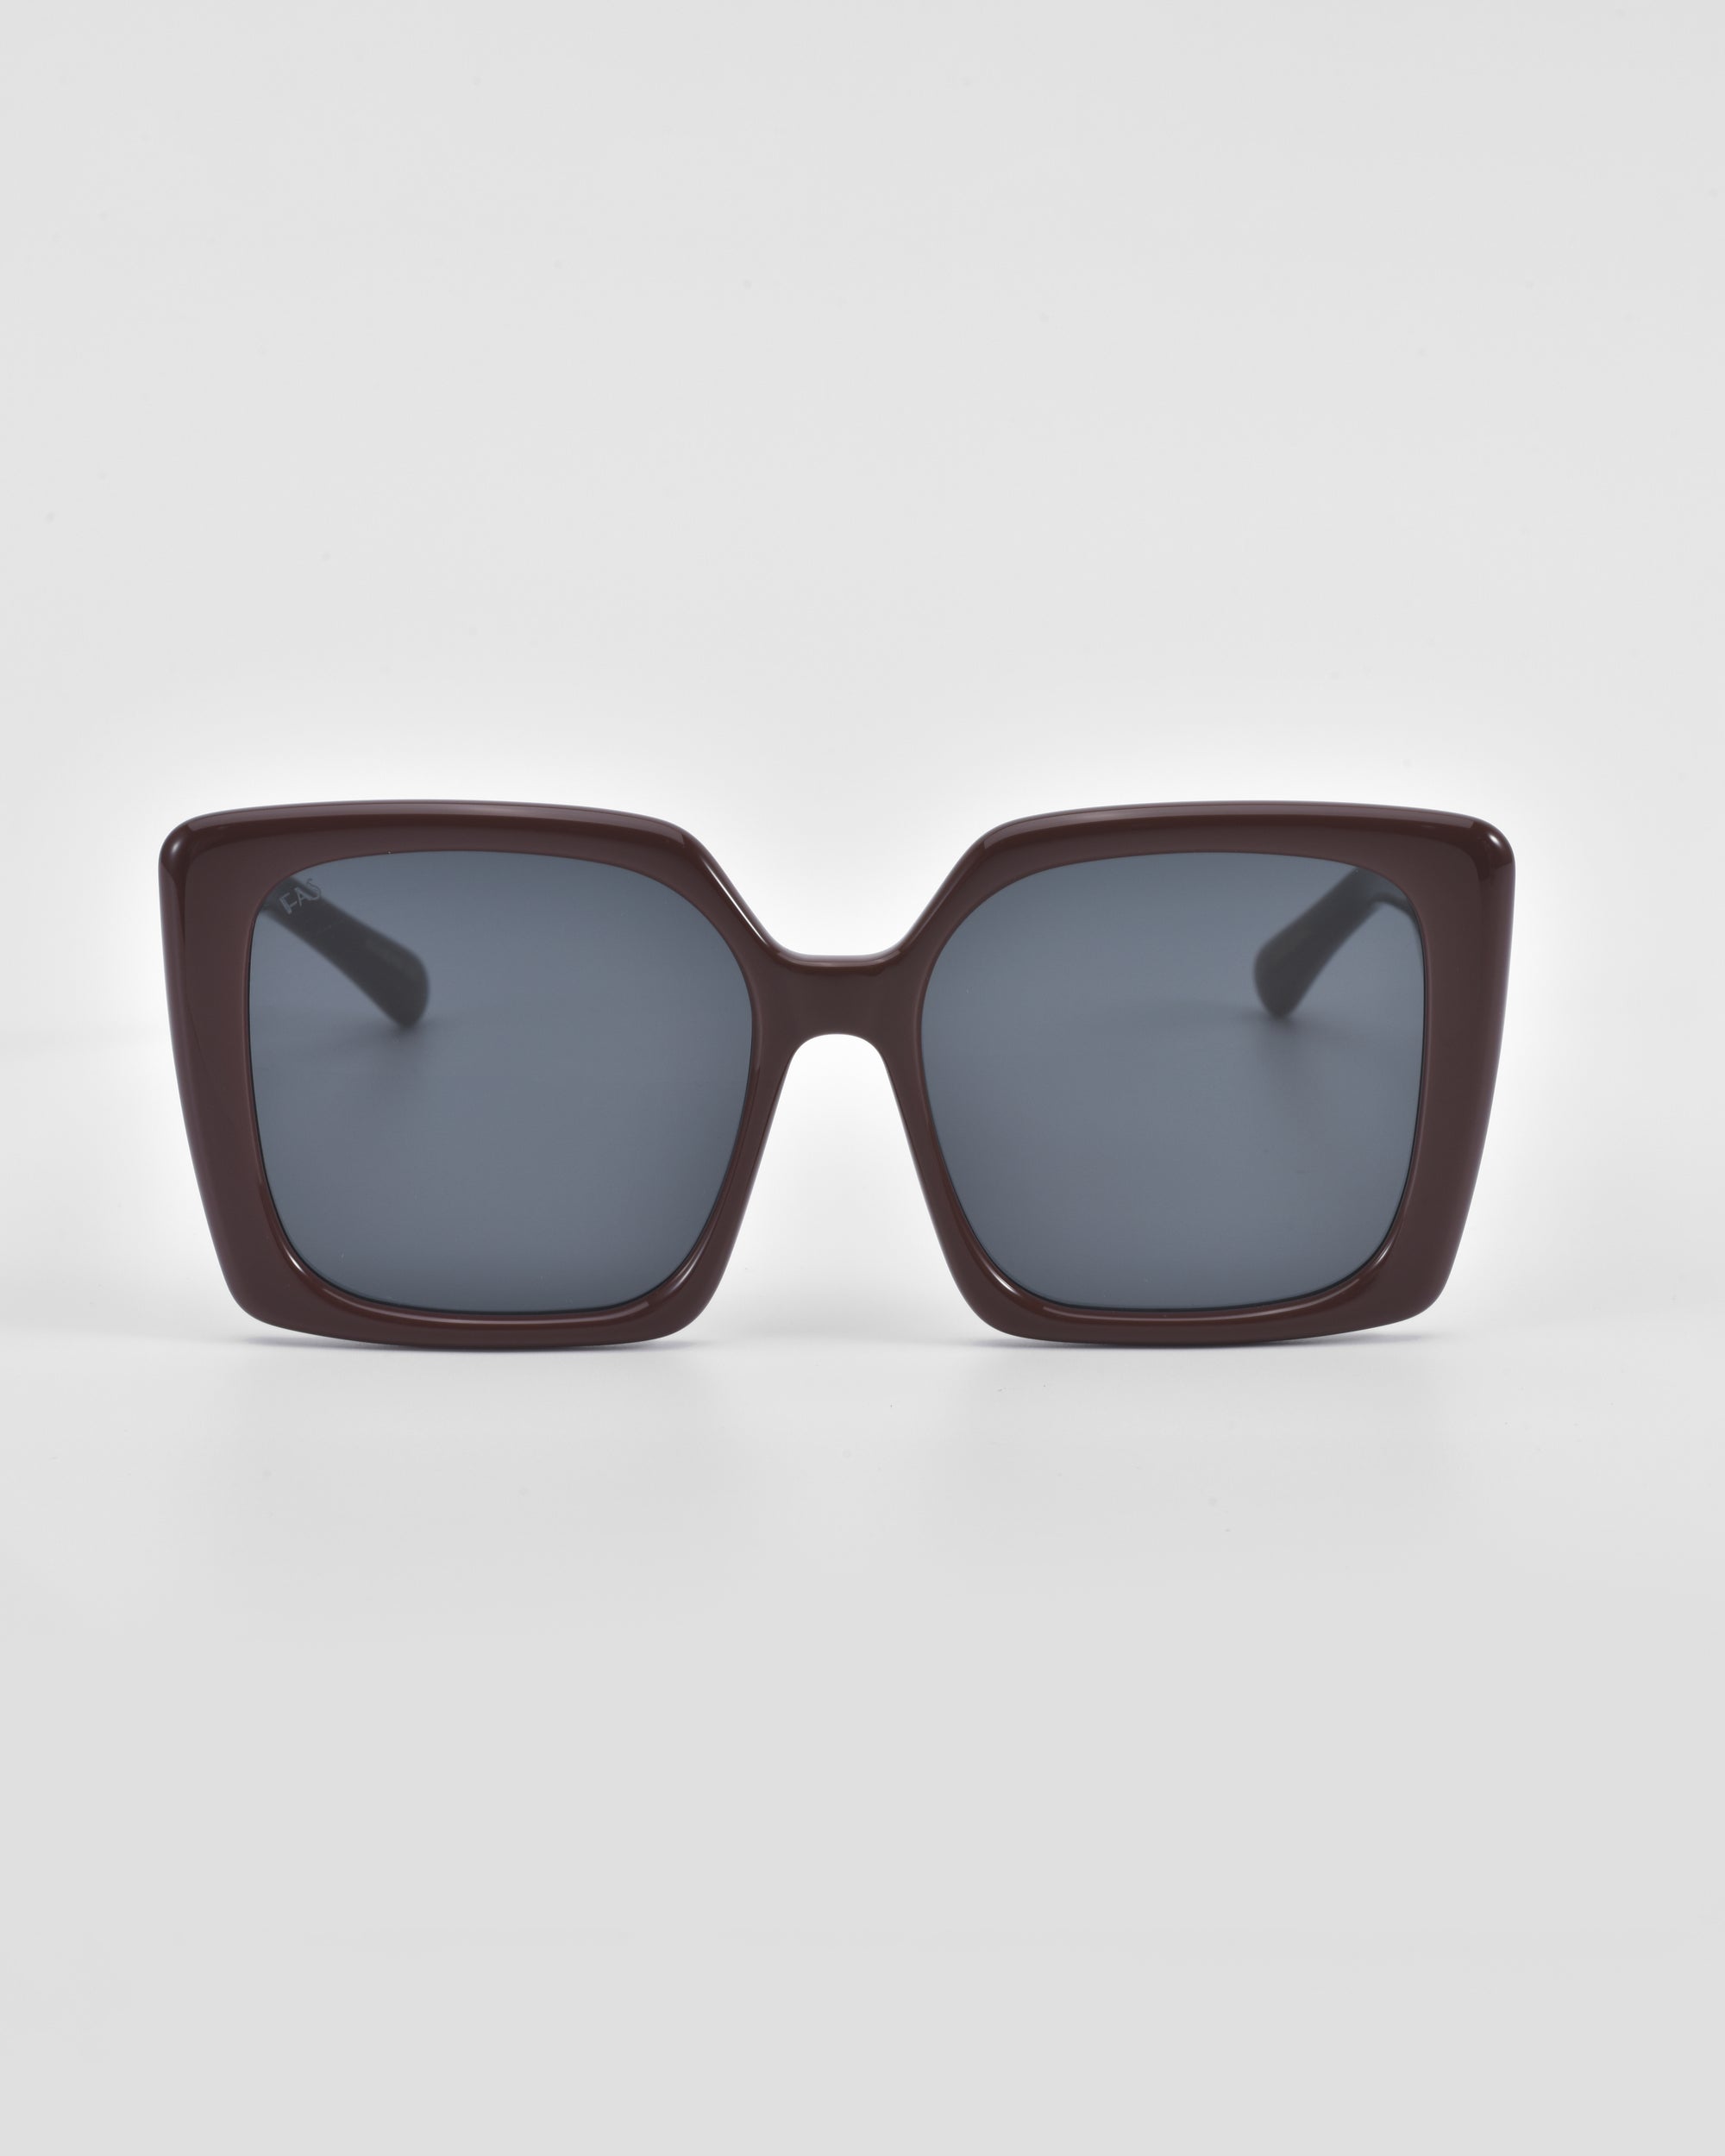 A pair of oversized soft-square For Art's Sake® Eos sunglasses with dark frames, viewed from the front against a plain white background. The lenses are tinted dark, providing a chic and fashionable appearance. Classic temple round details elevate the timeless charm, making these shades a stylish staple.